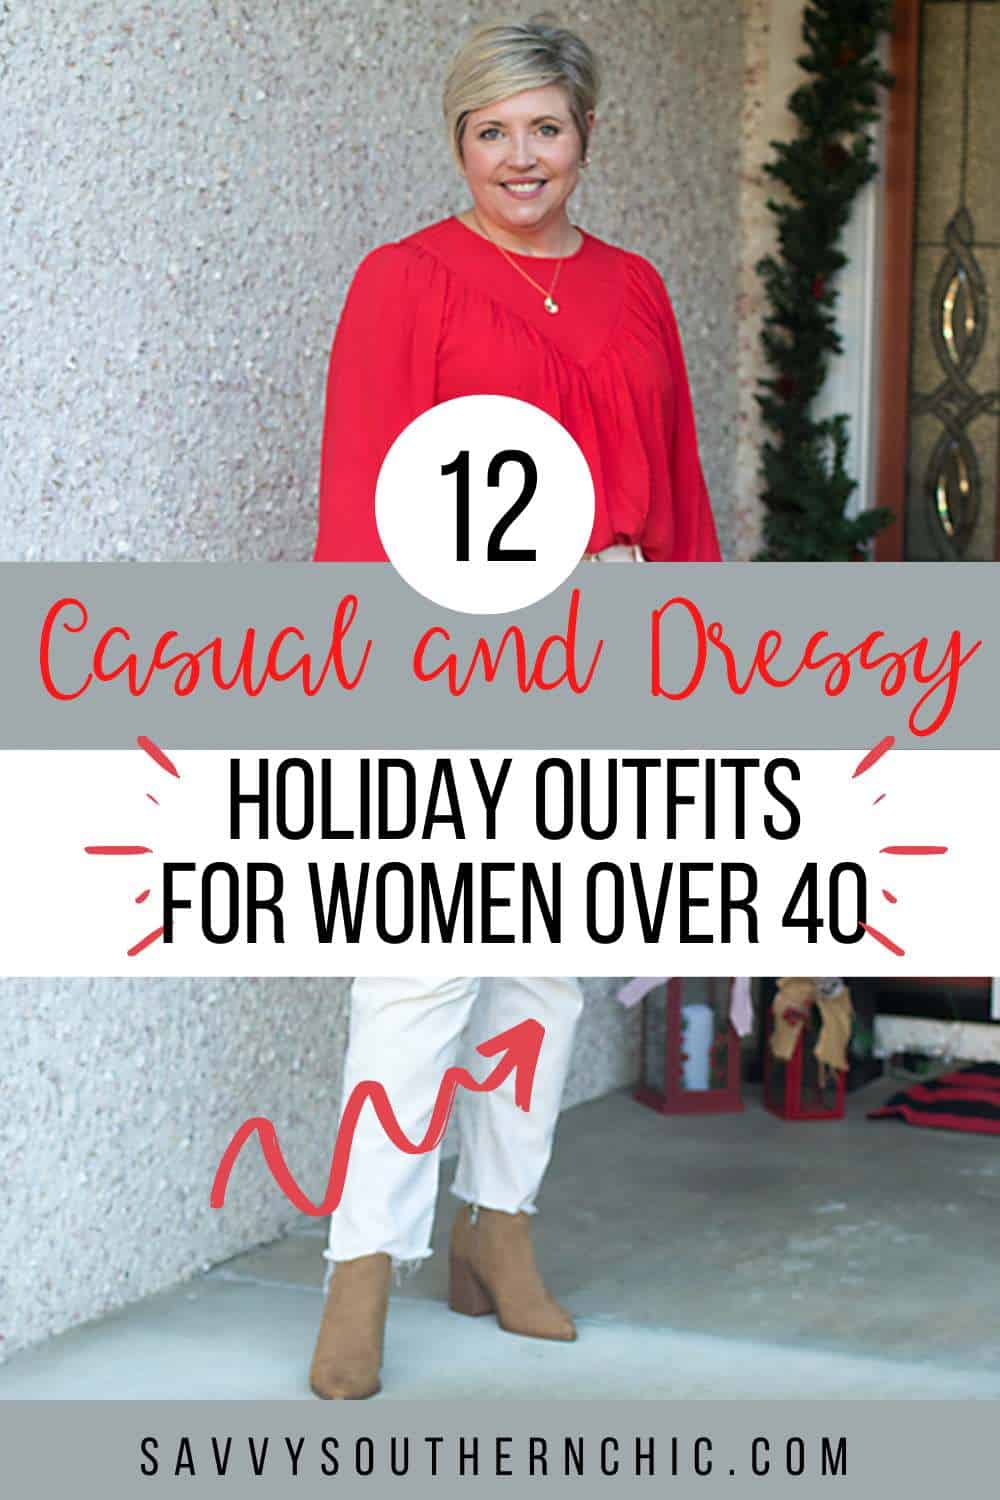 12 casual and dressy Holiday Outfit for women over 40